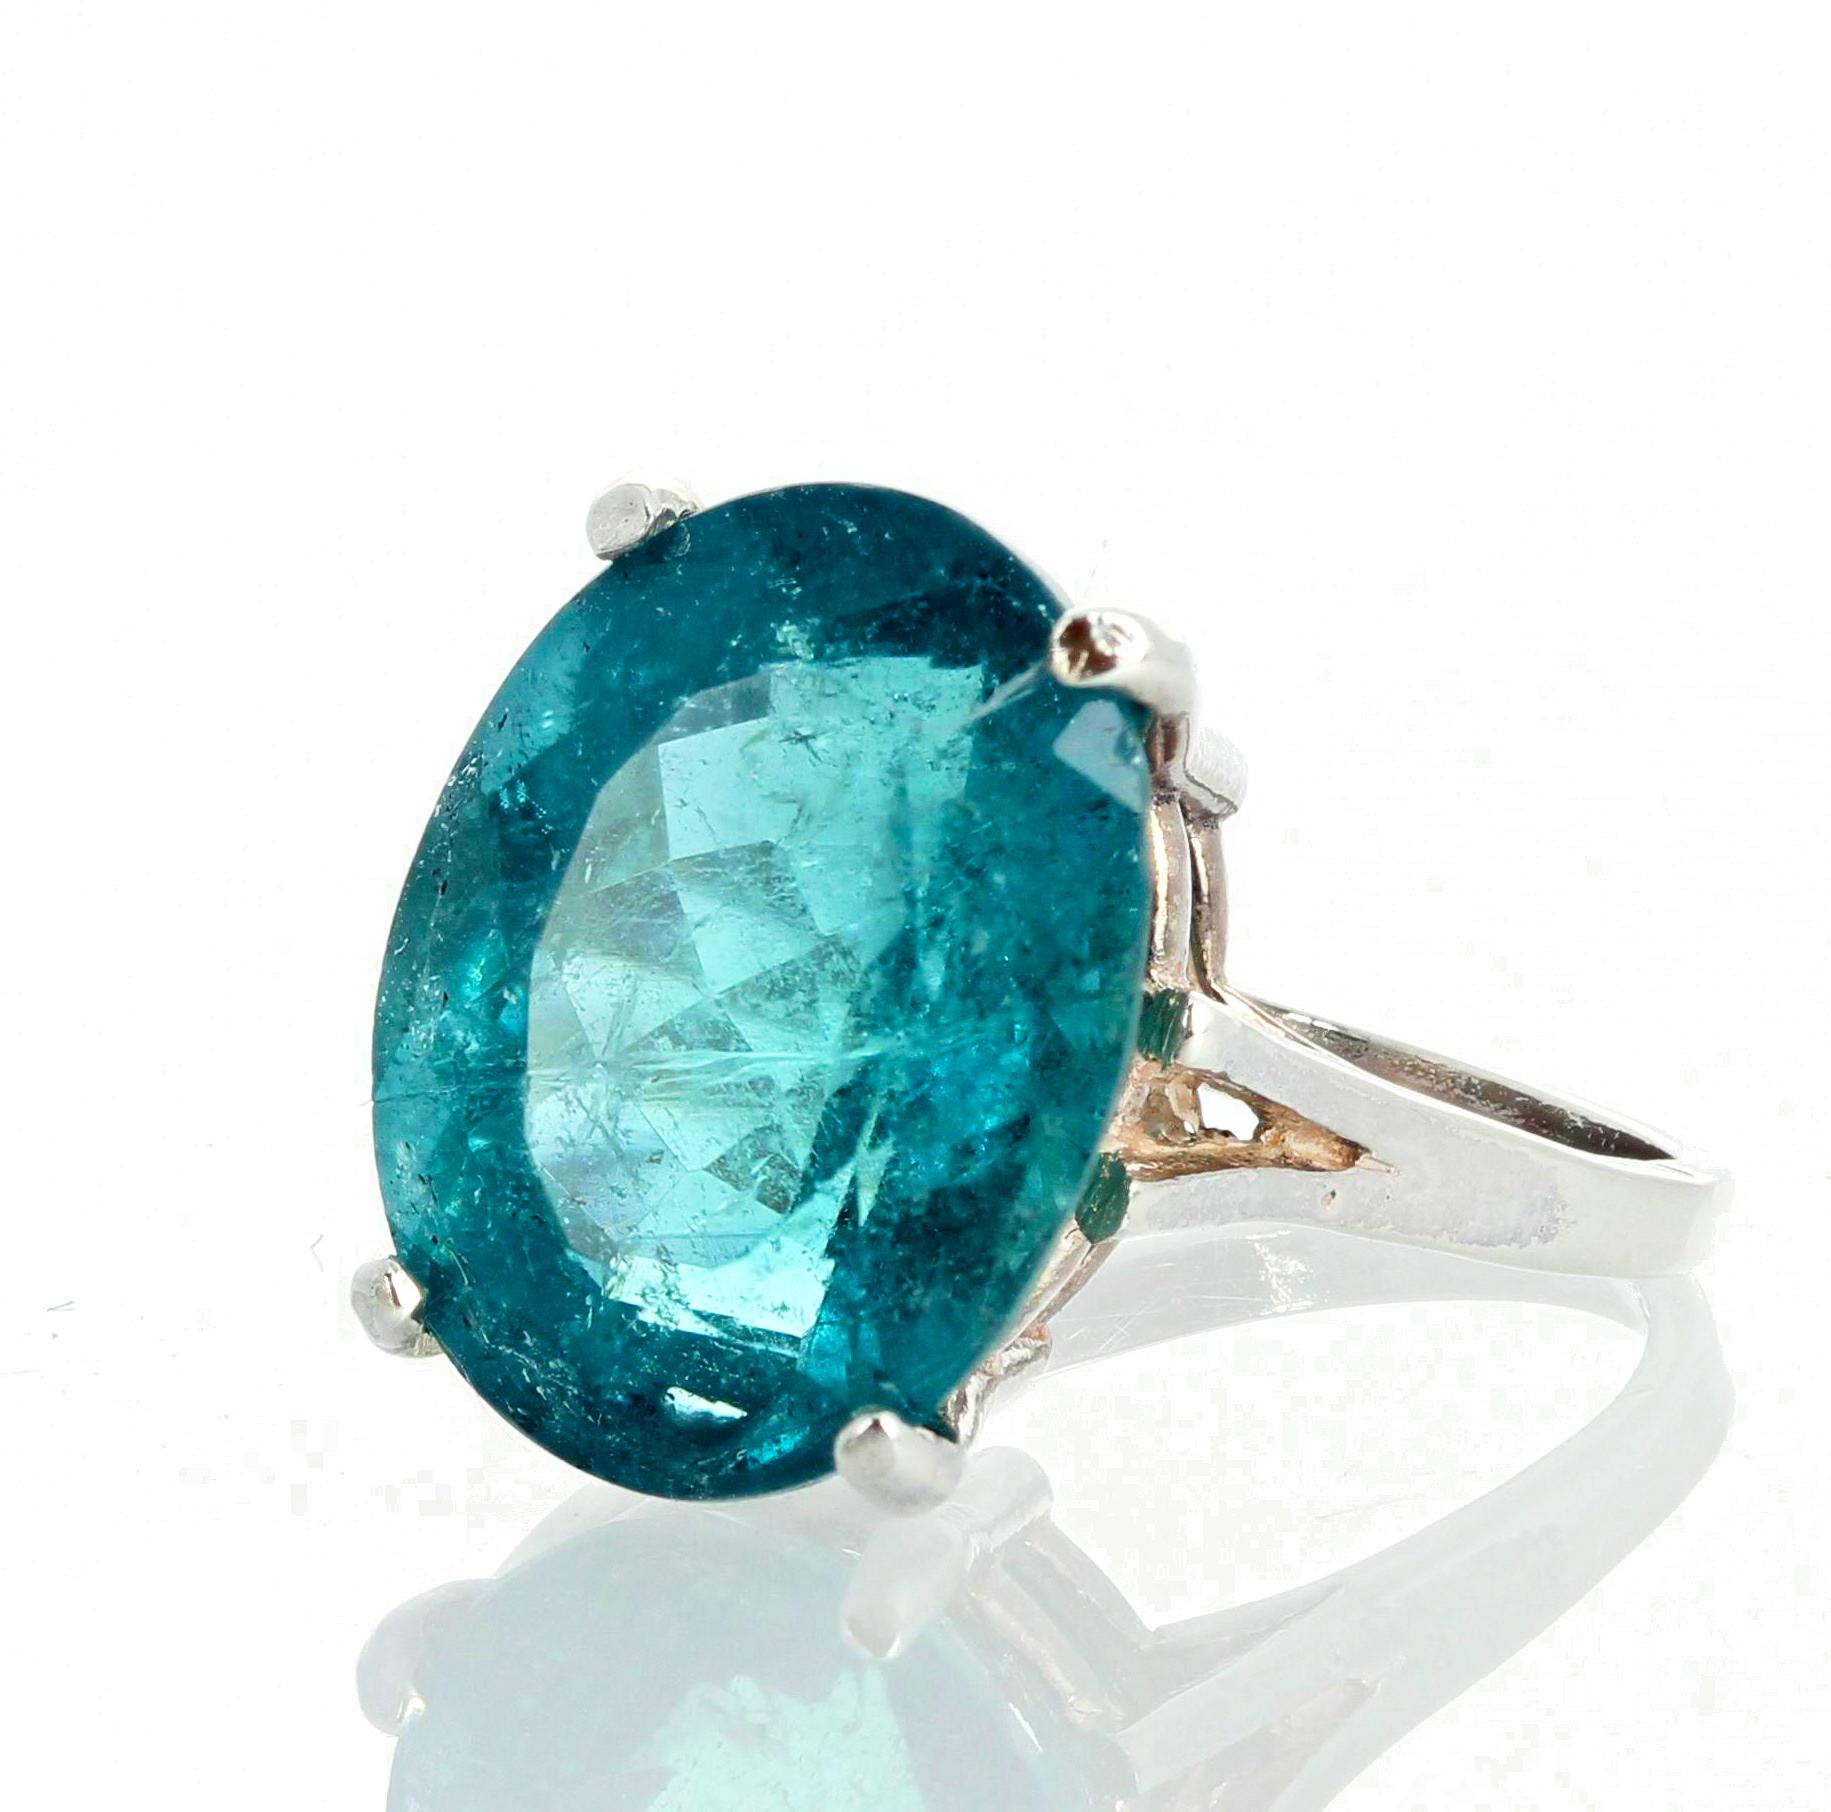 Glorious blue rare 7.9 carat Brasilian  Indicolite Tourmaline (15 mm x 11 mm) set in a sterling silver ring size 7 (sizable).  The natural tiny flecks inside the stone make it glitter intensely.